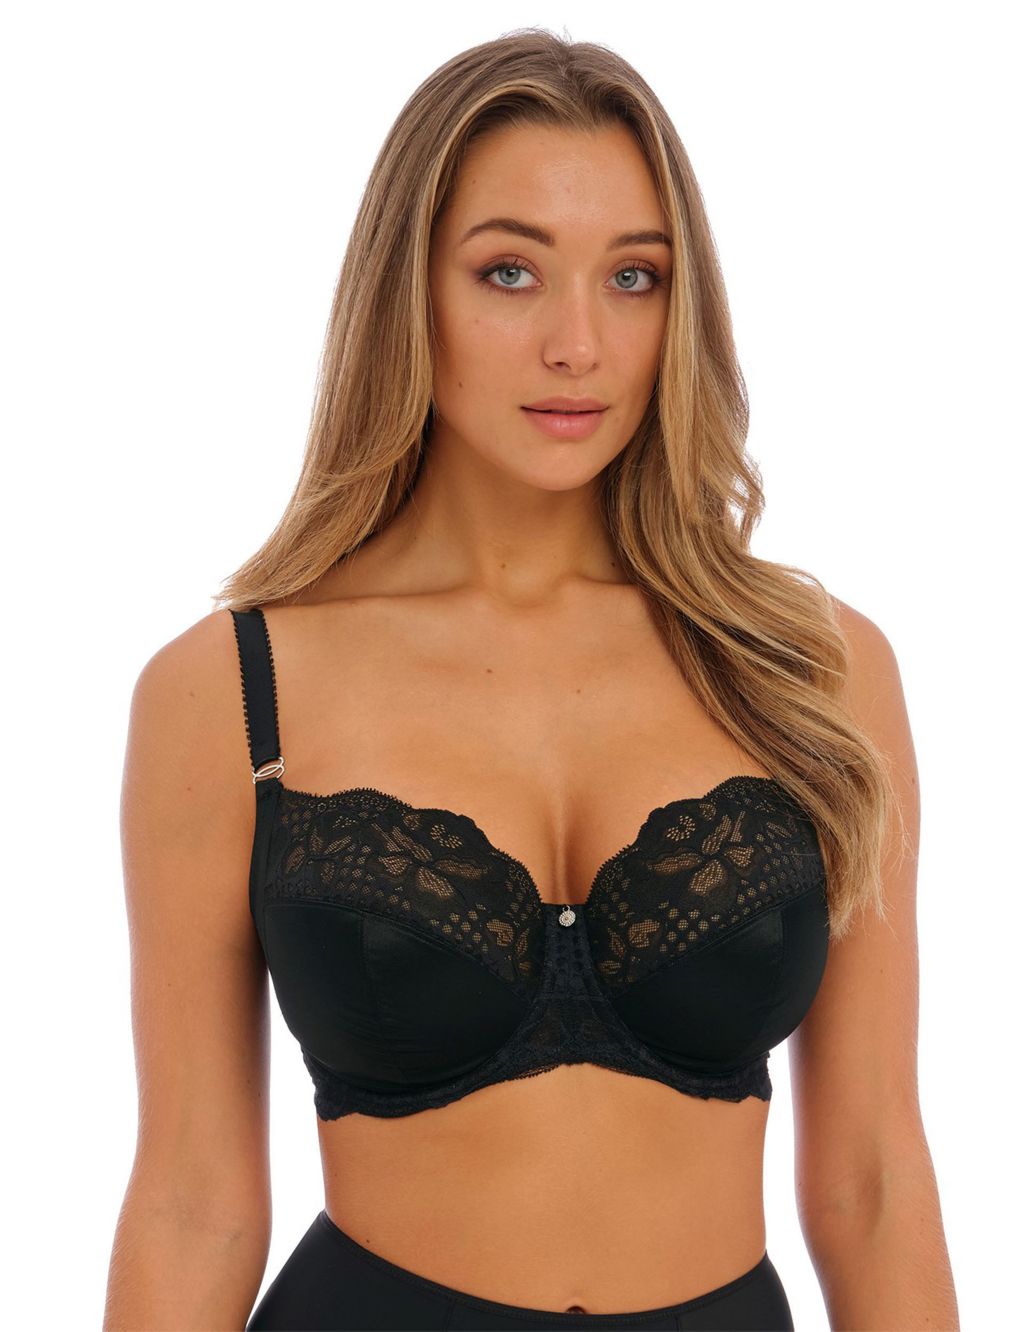 Reflect Wired Side Support Full Cup Bra image 4